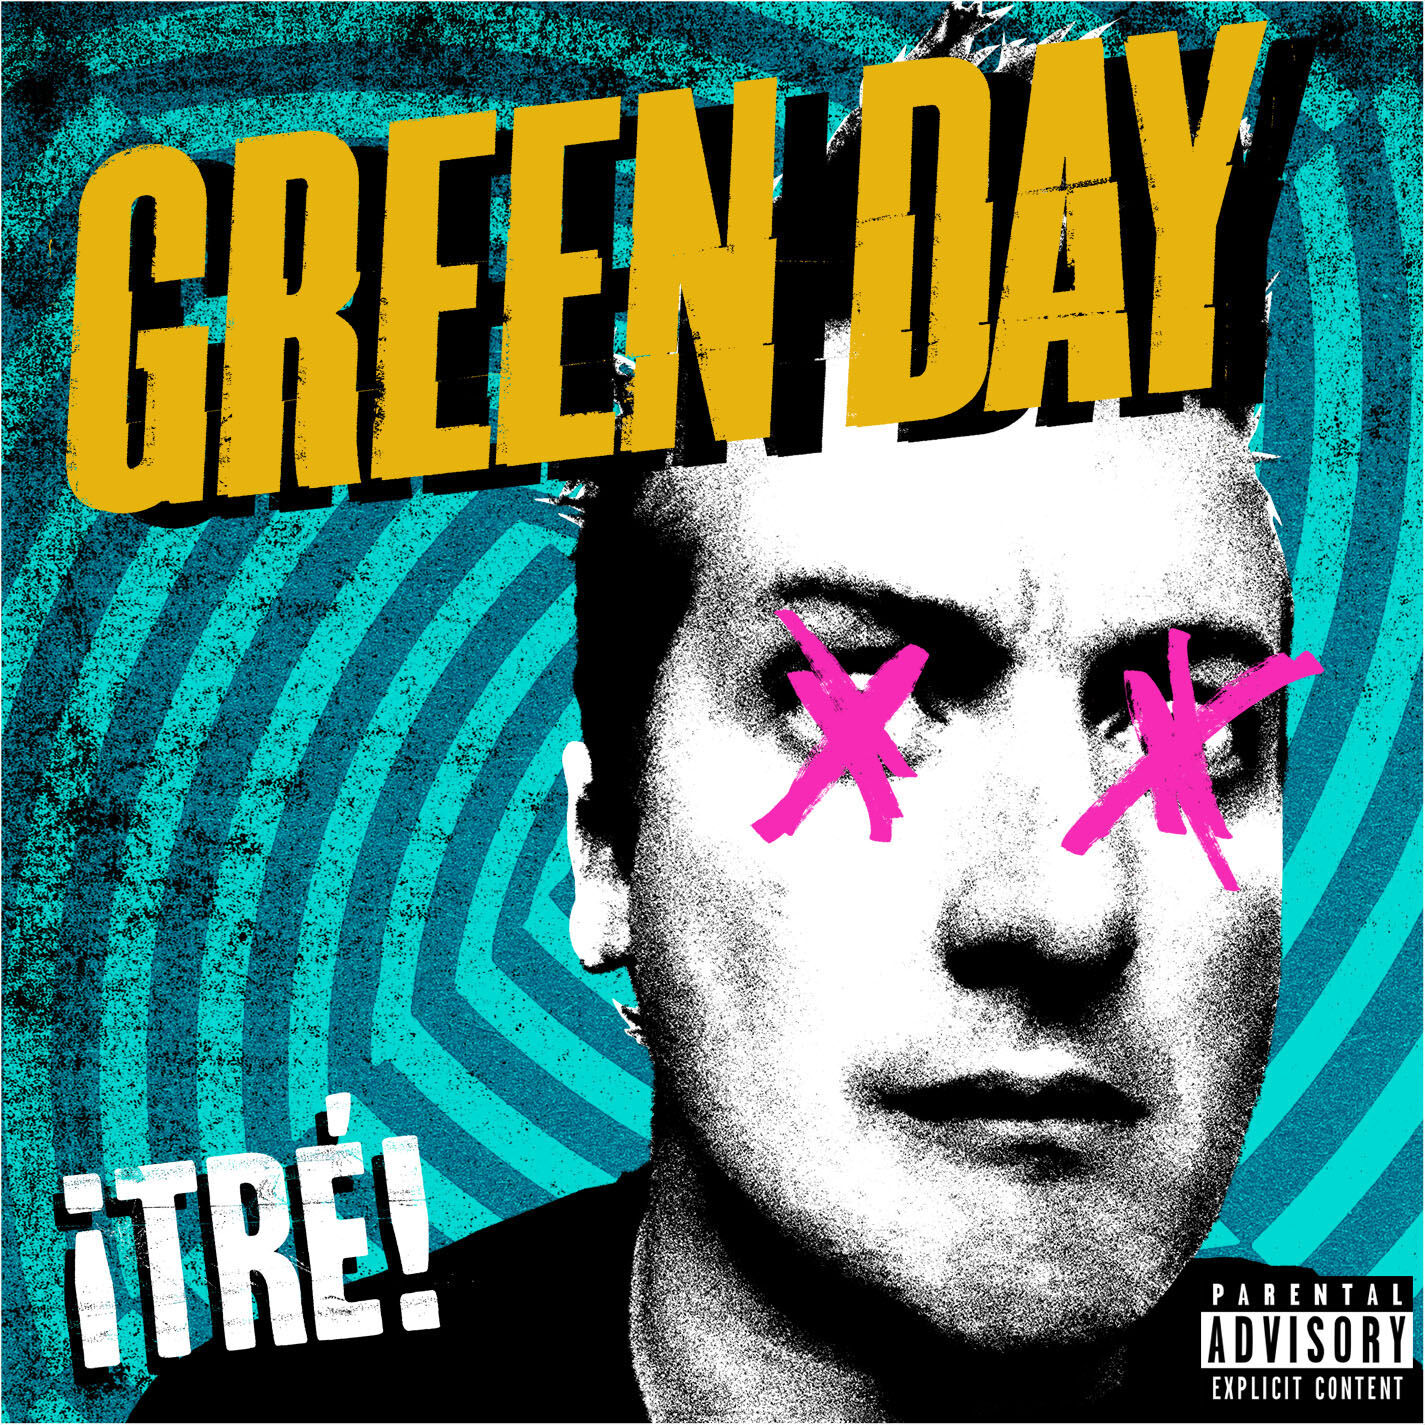 CDS Green Day | Official Store